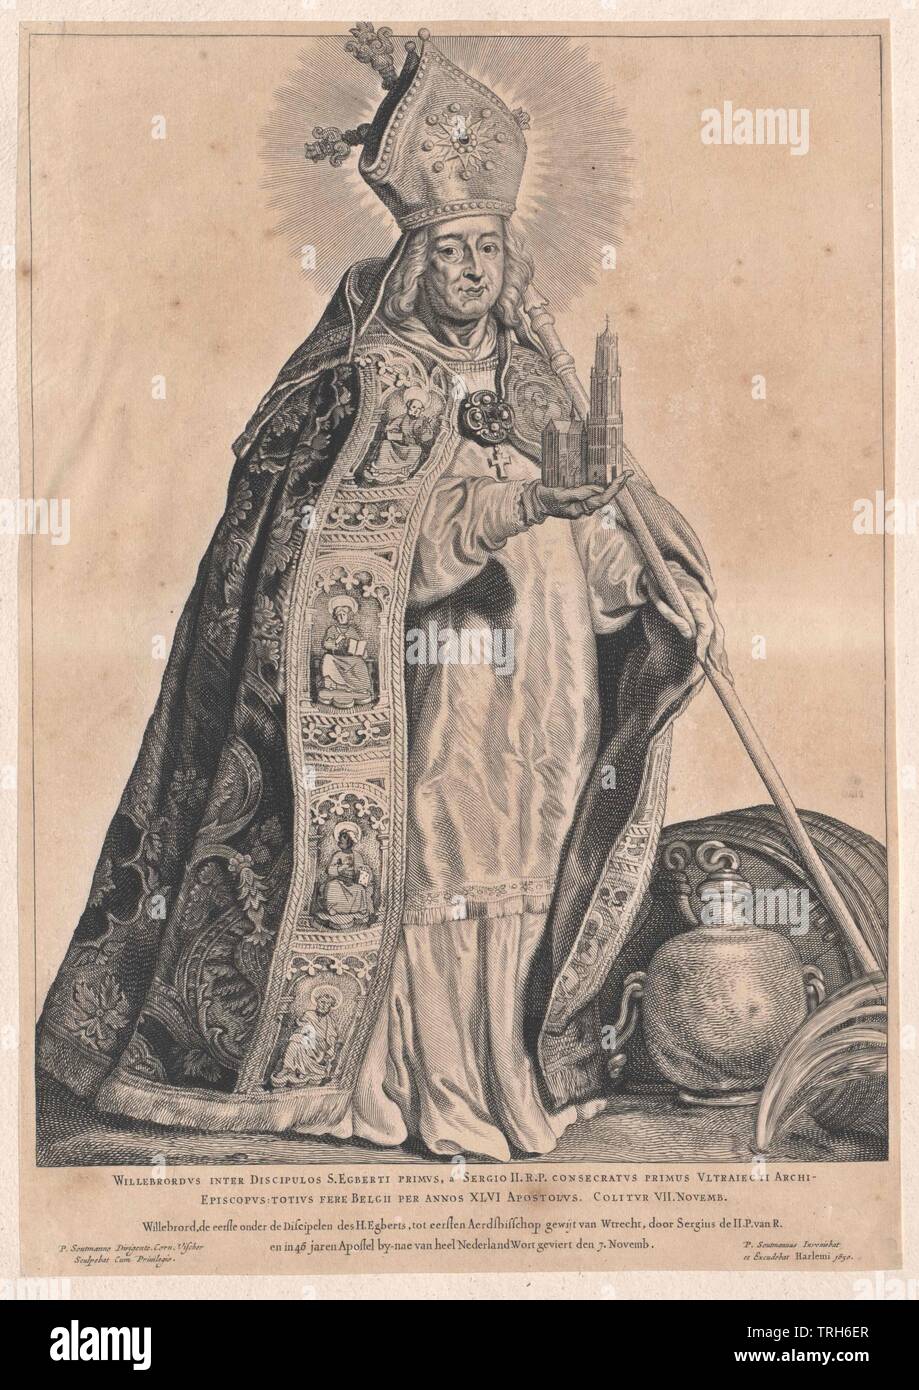 Willibrord, saint,ecclesiastic, chaplain, chaplains, saint, hallow, saints, martyr, martyrs, blessed, people, full-length, full length, man, men, male, manly, Additional-Rights-Clearance-Info-Not-Available Stock Photo